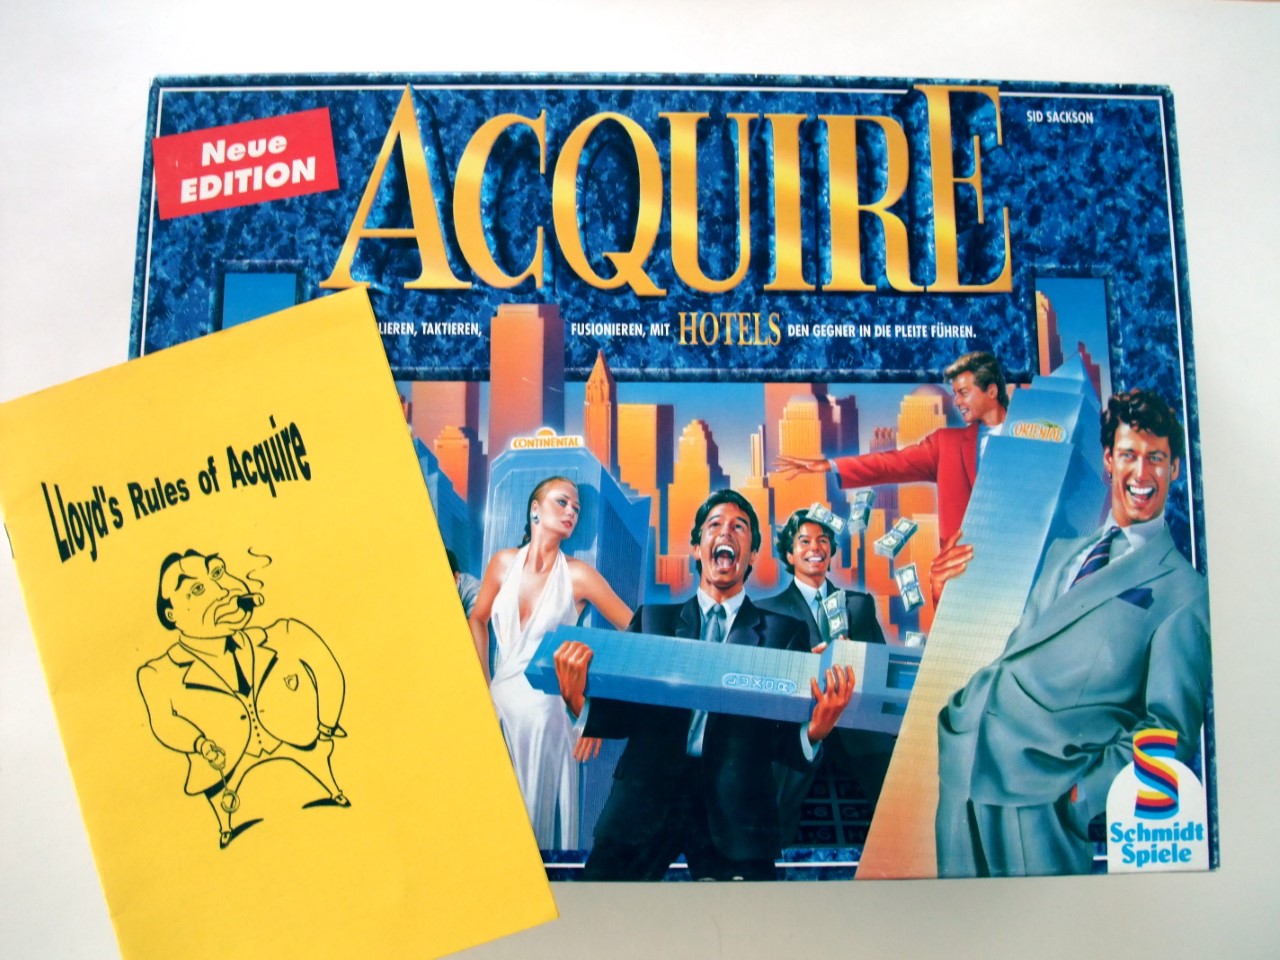 1997 ACQUIRE with Lloyd's Rules of ACQUIRE